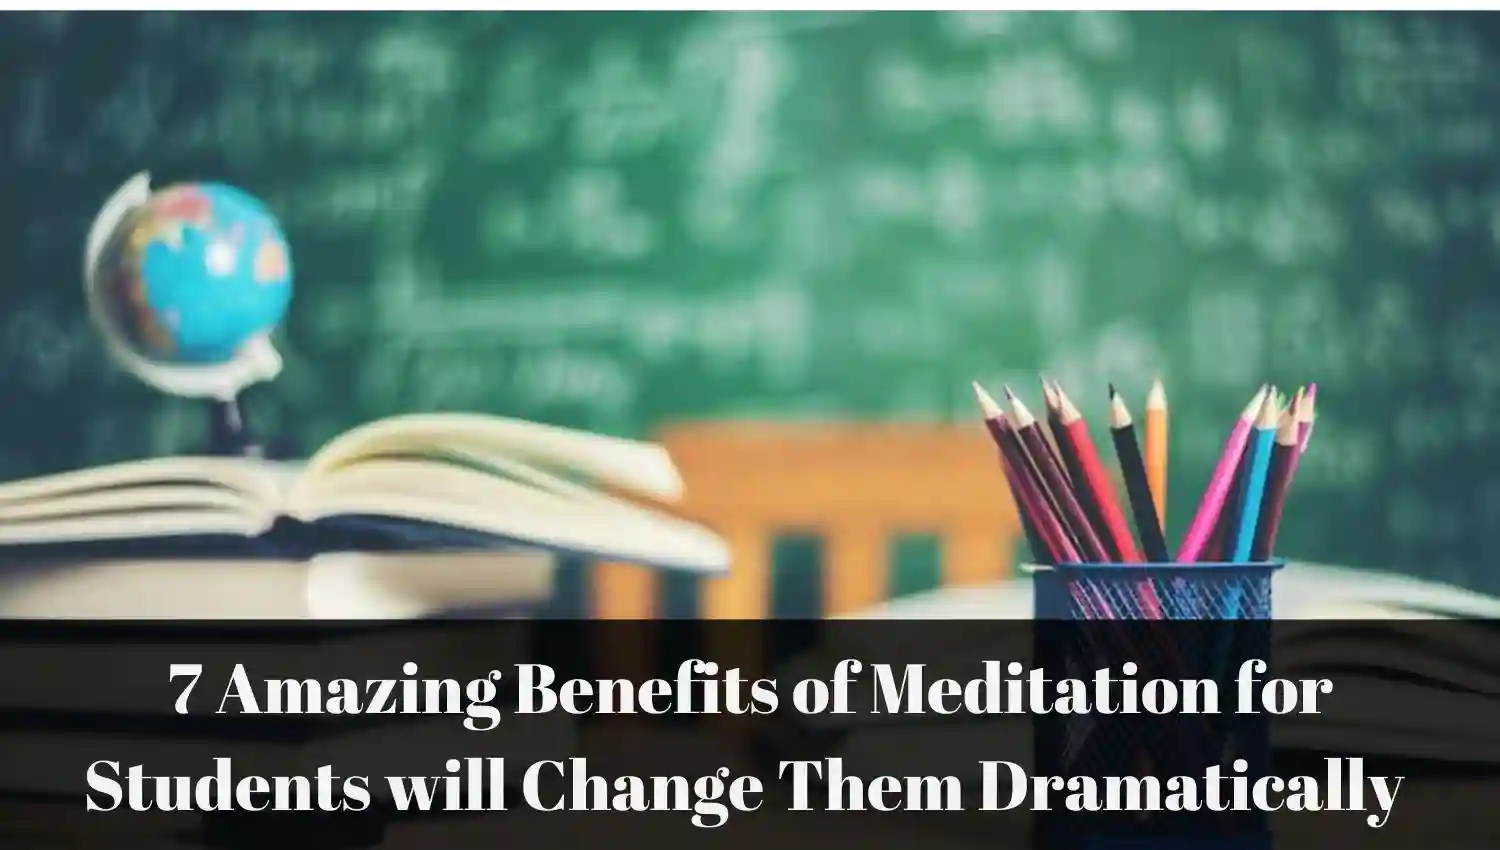 Benefits of Meditation for Students